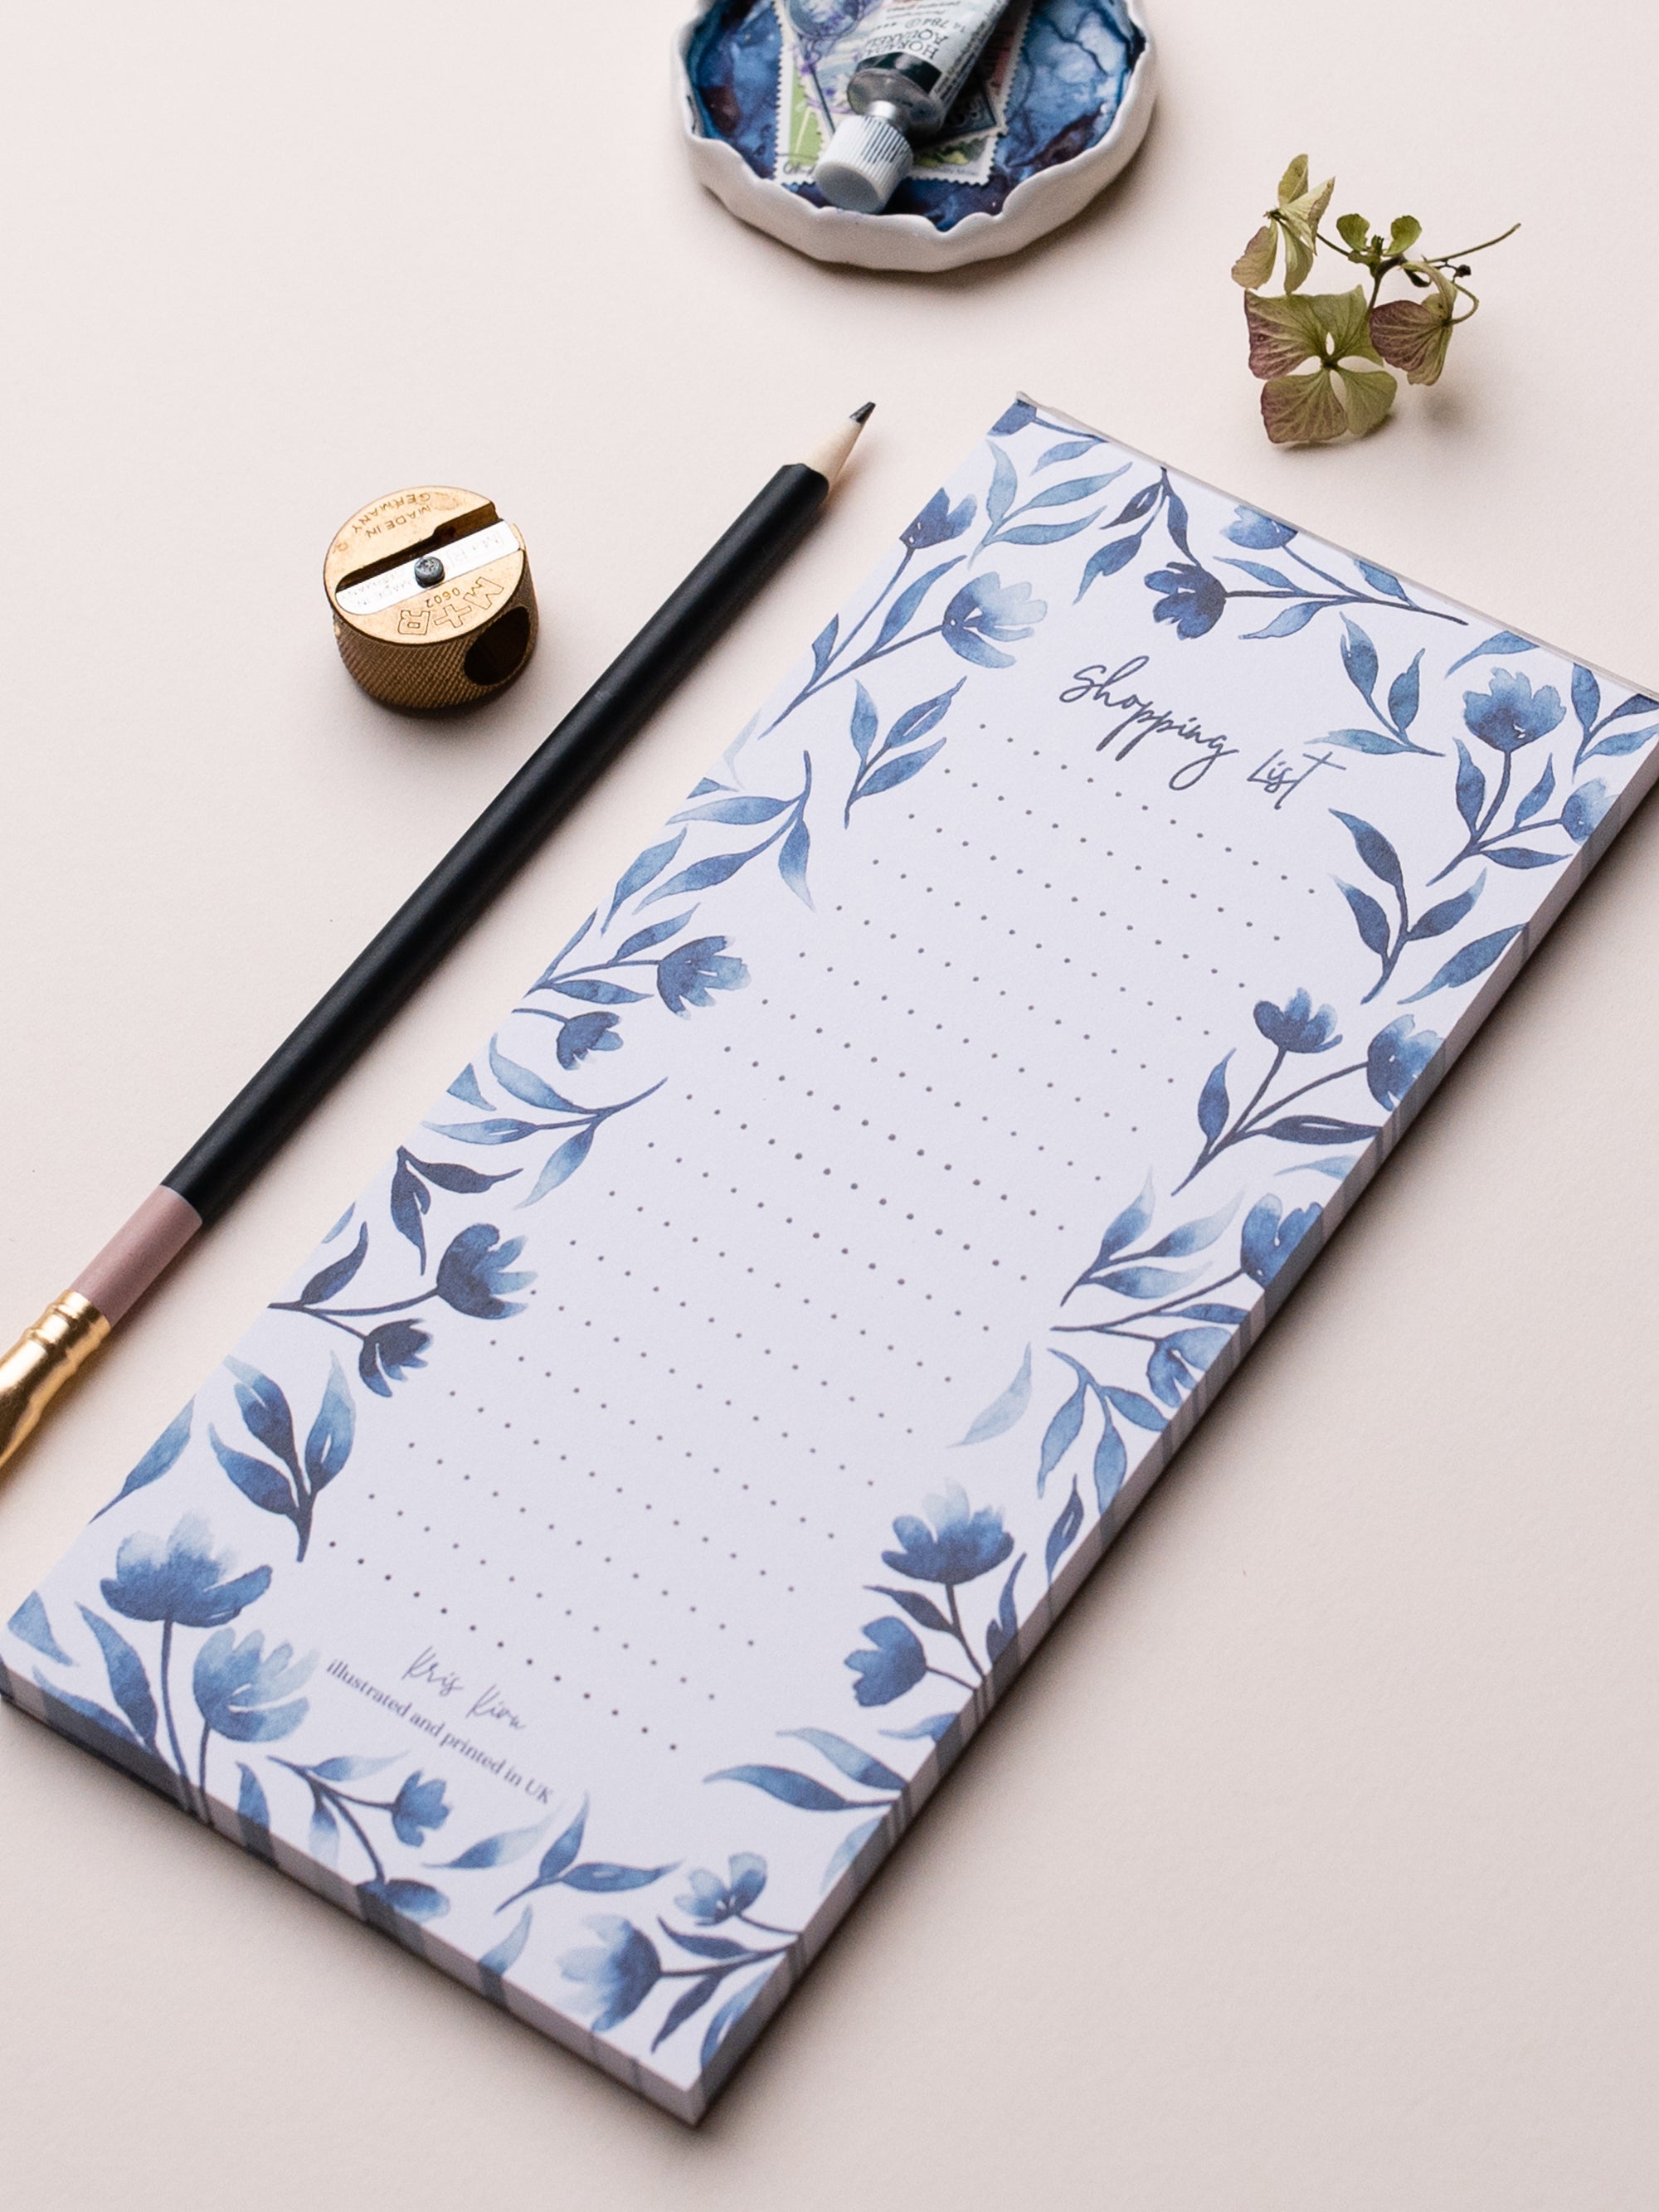 Funky Flowers Shopping list pads